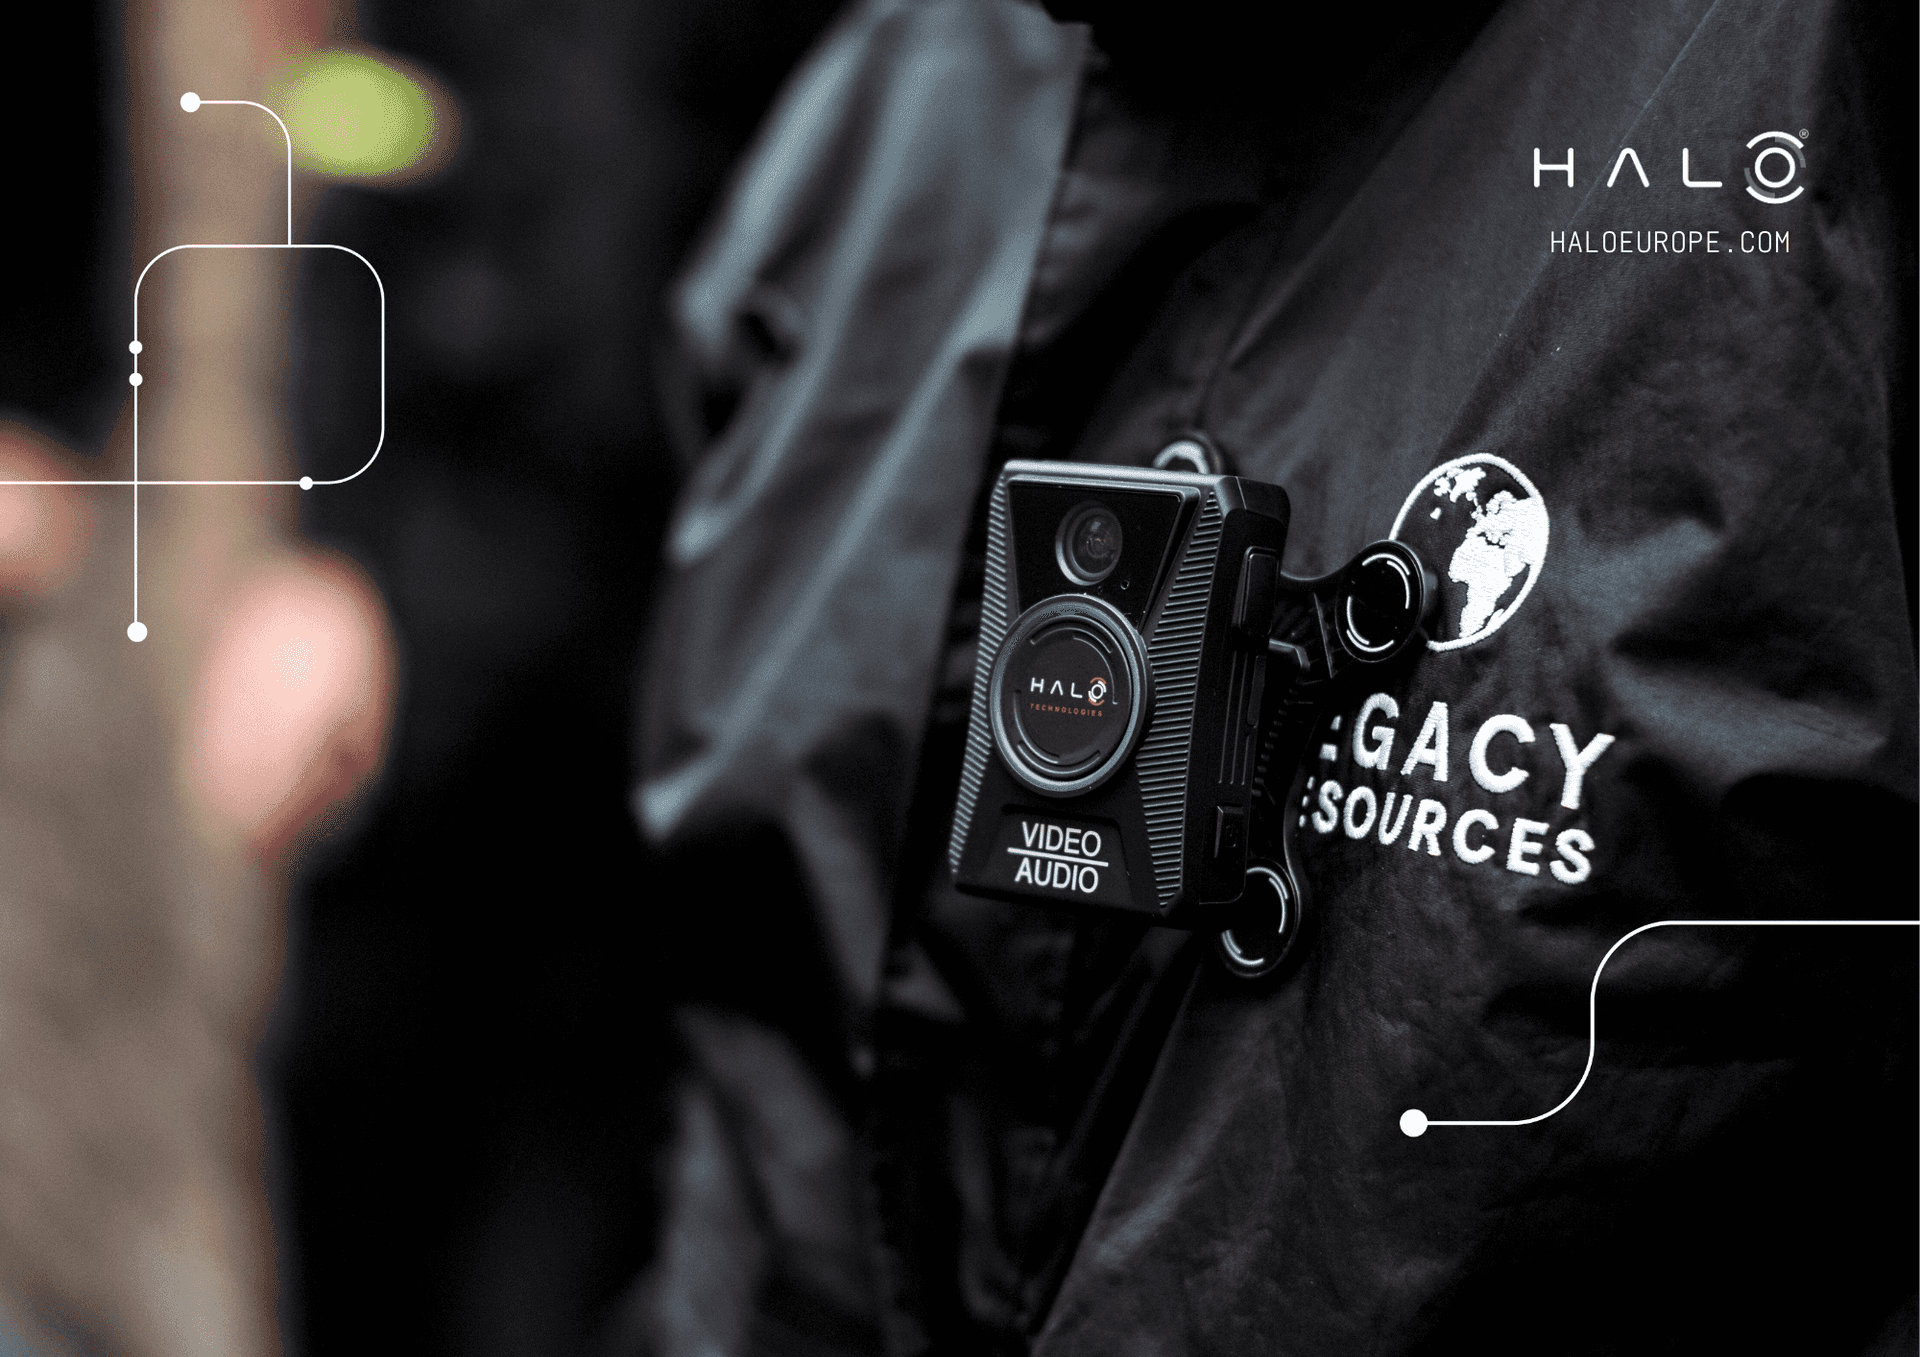 HALO AND LEGACY RESOURCES JOIN FORCES FOR A CUTTING-EDGE SECURITY SOLUTION.